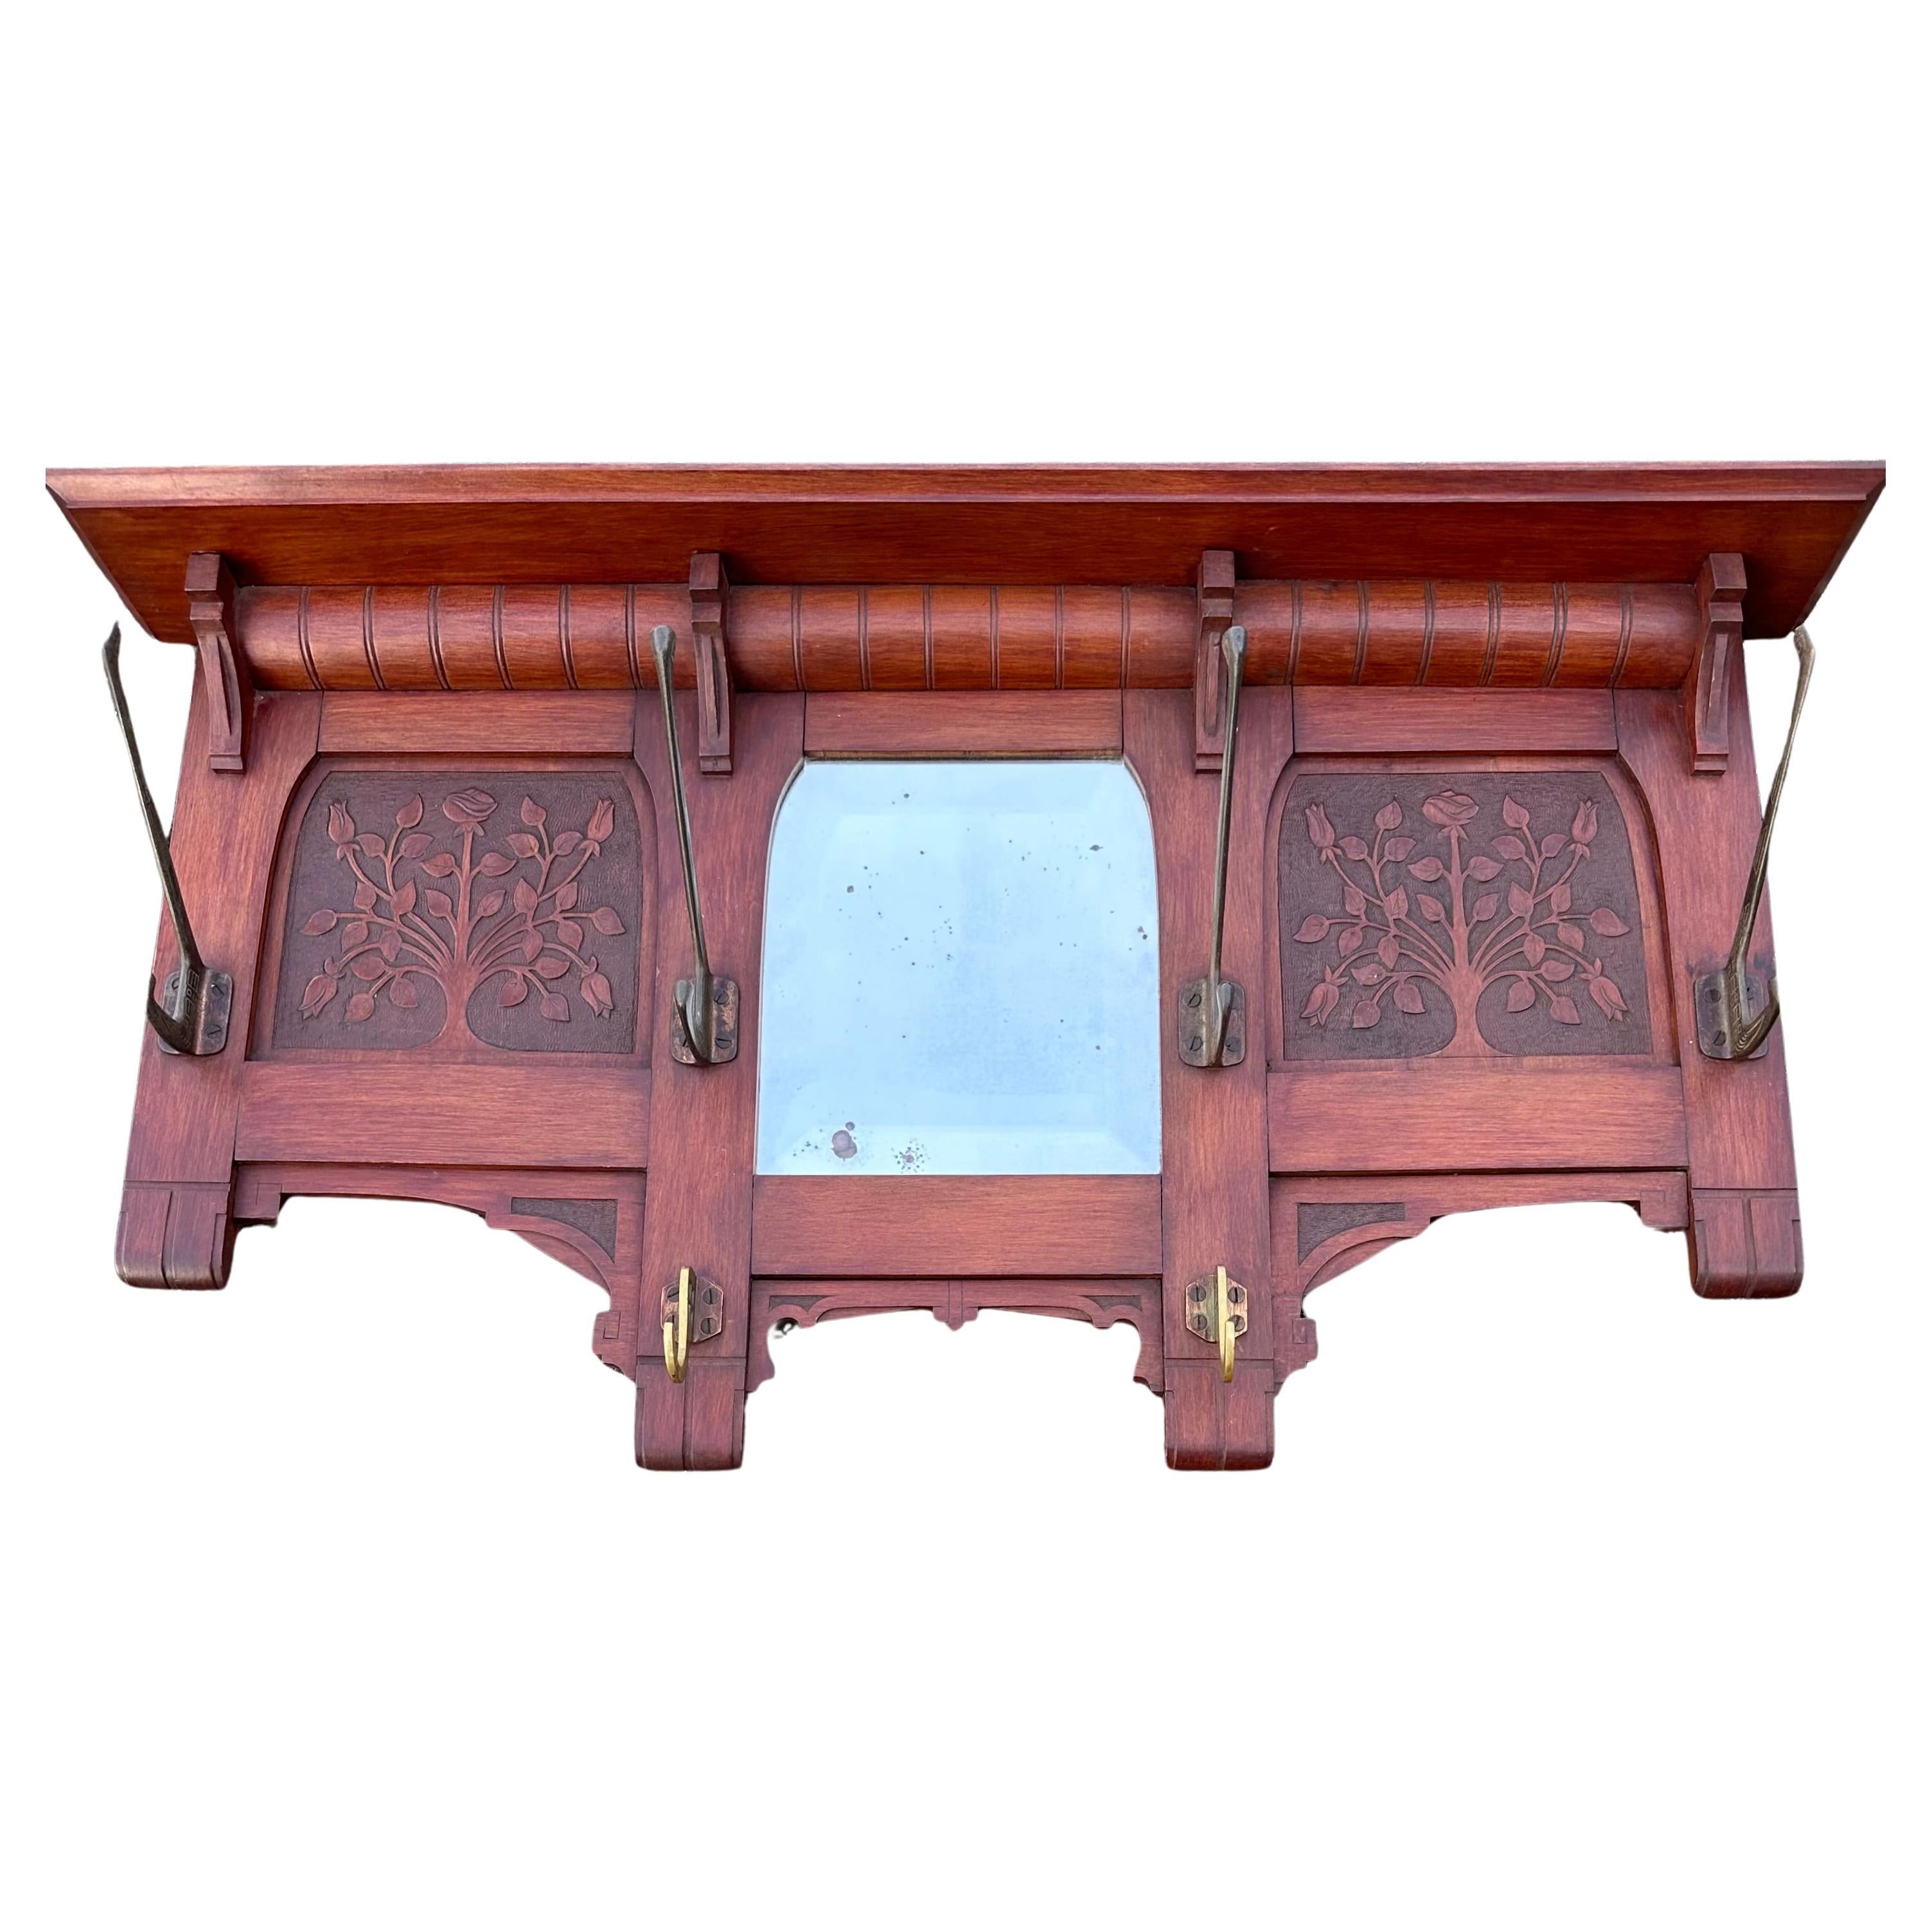 Early 1900 Arts & Crafts Coat Rack w. Carved Rose Bush Panels and Beveled Mirror For Sale